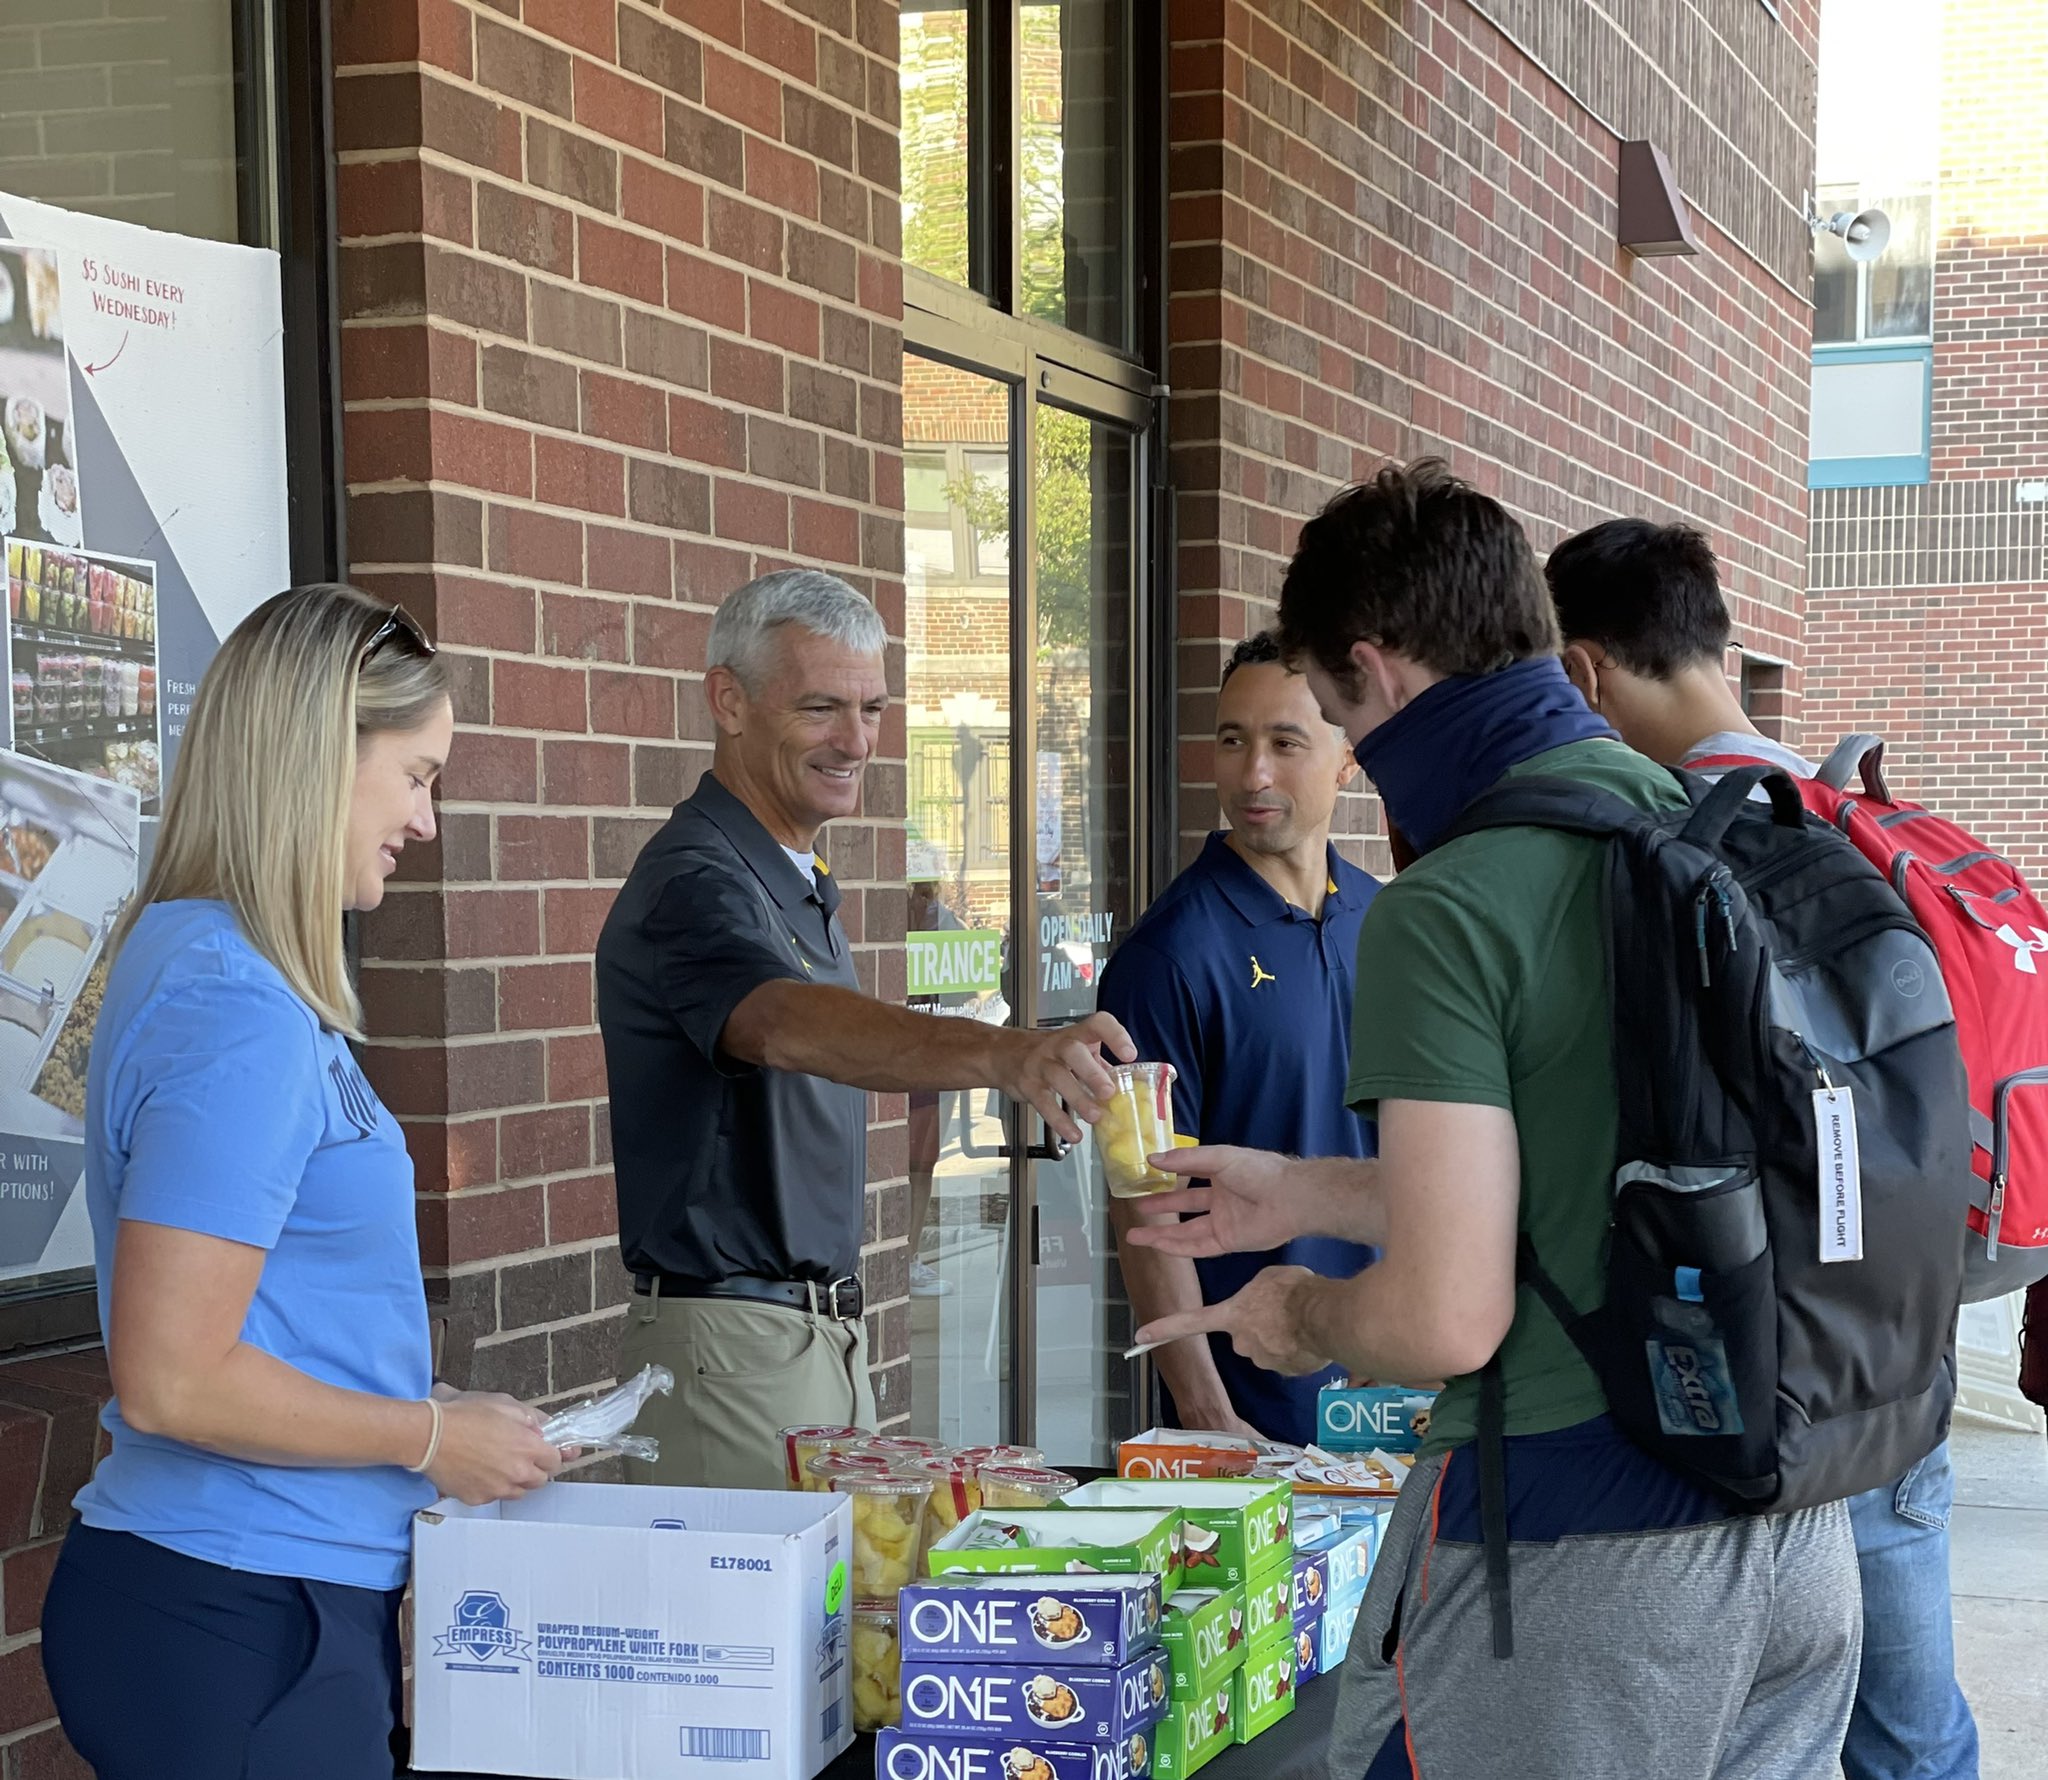 University president and basketball coaches handing out breakfast on first day of classes